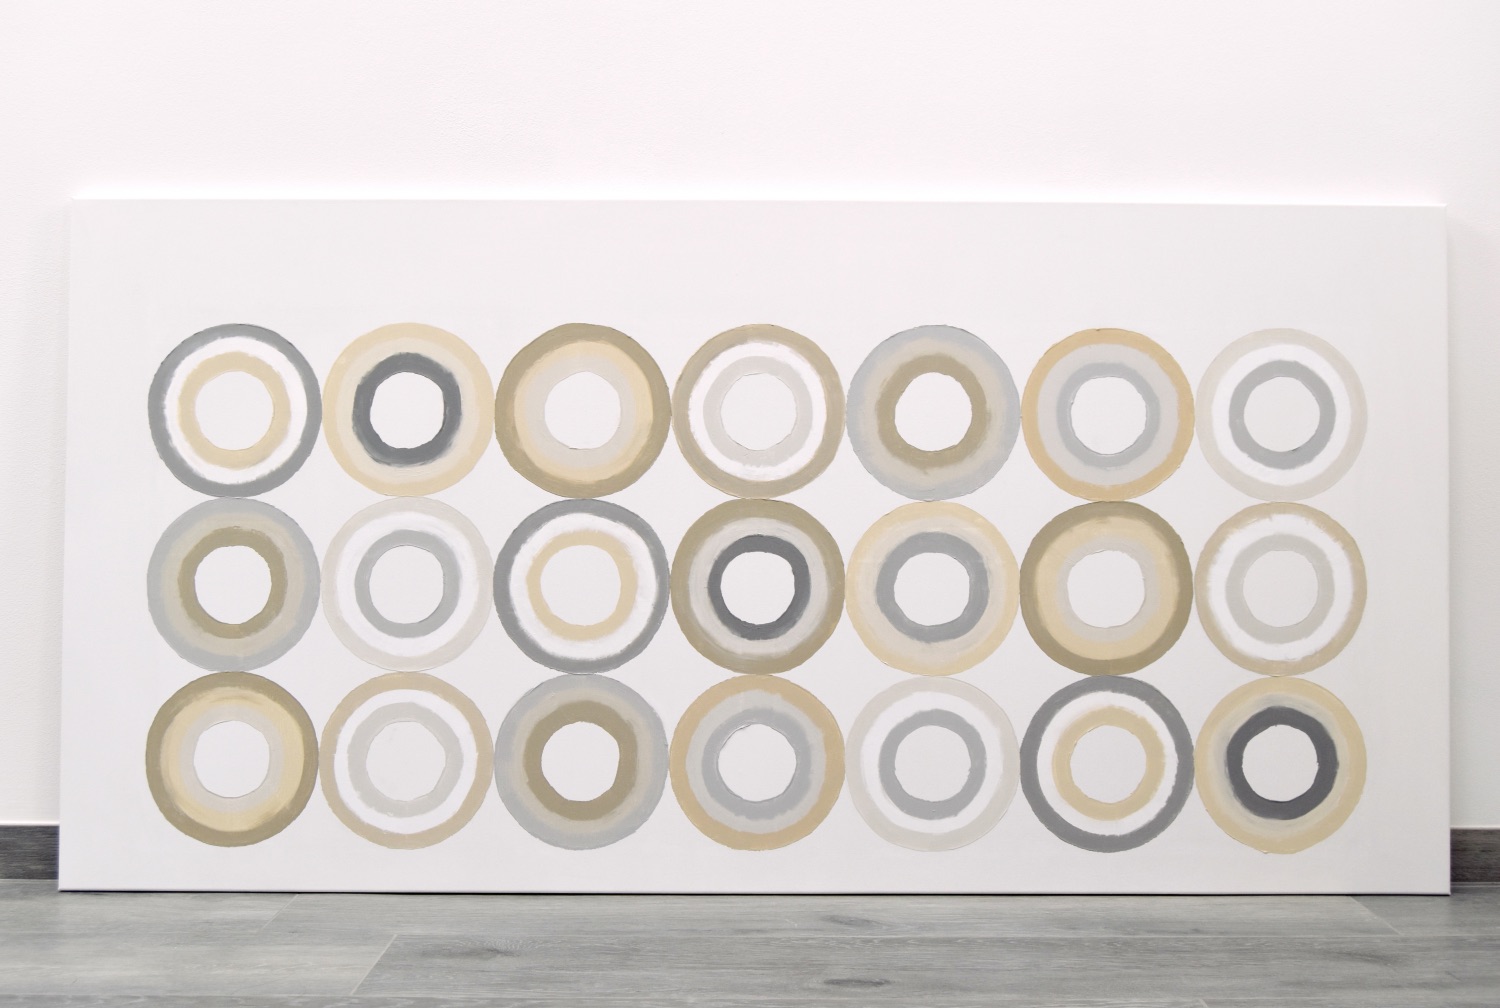 contemporary artworks focused on neutral colors, structure and shapes by german artist Astrid Stoeppel